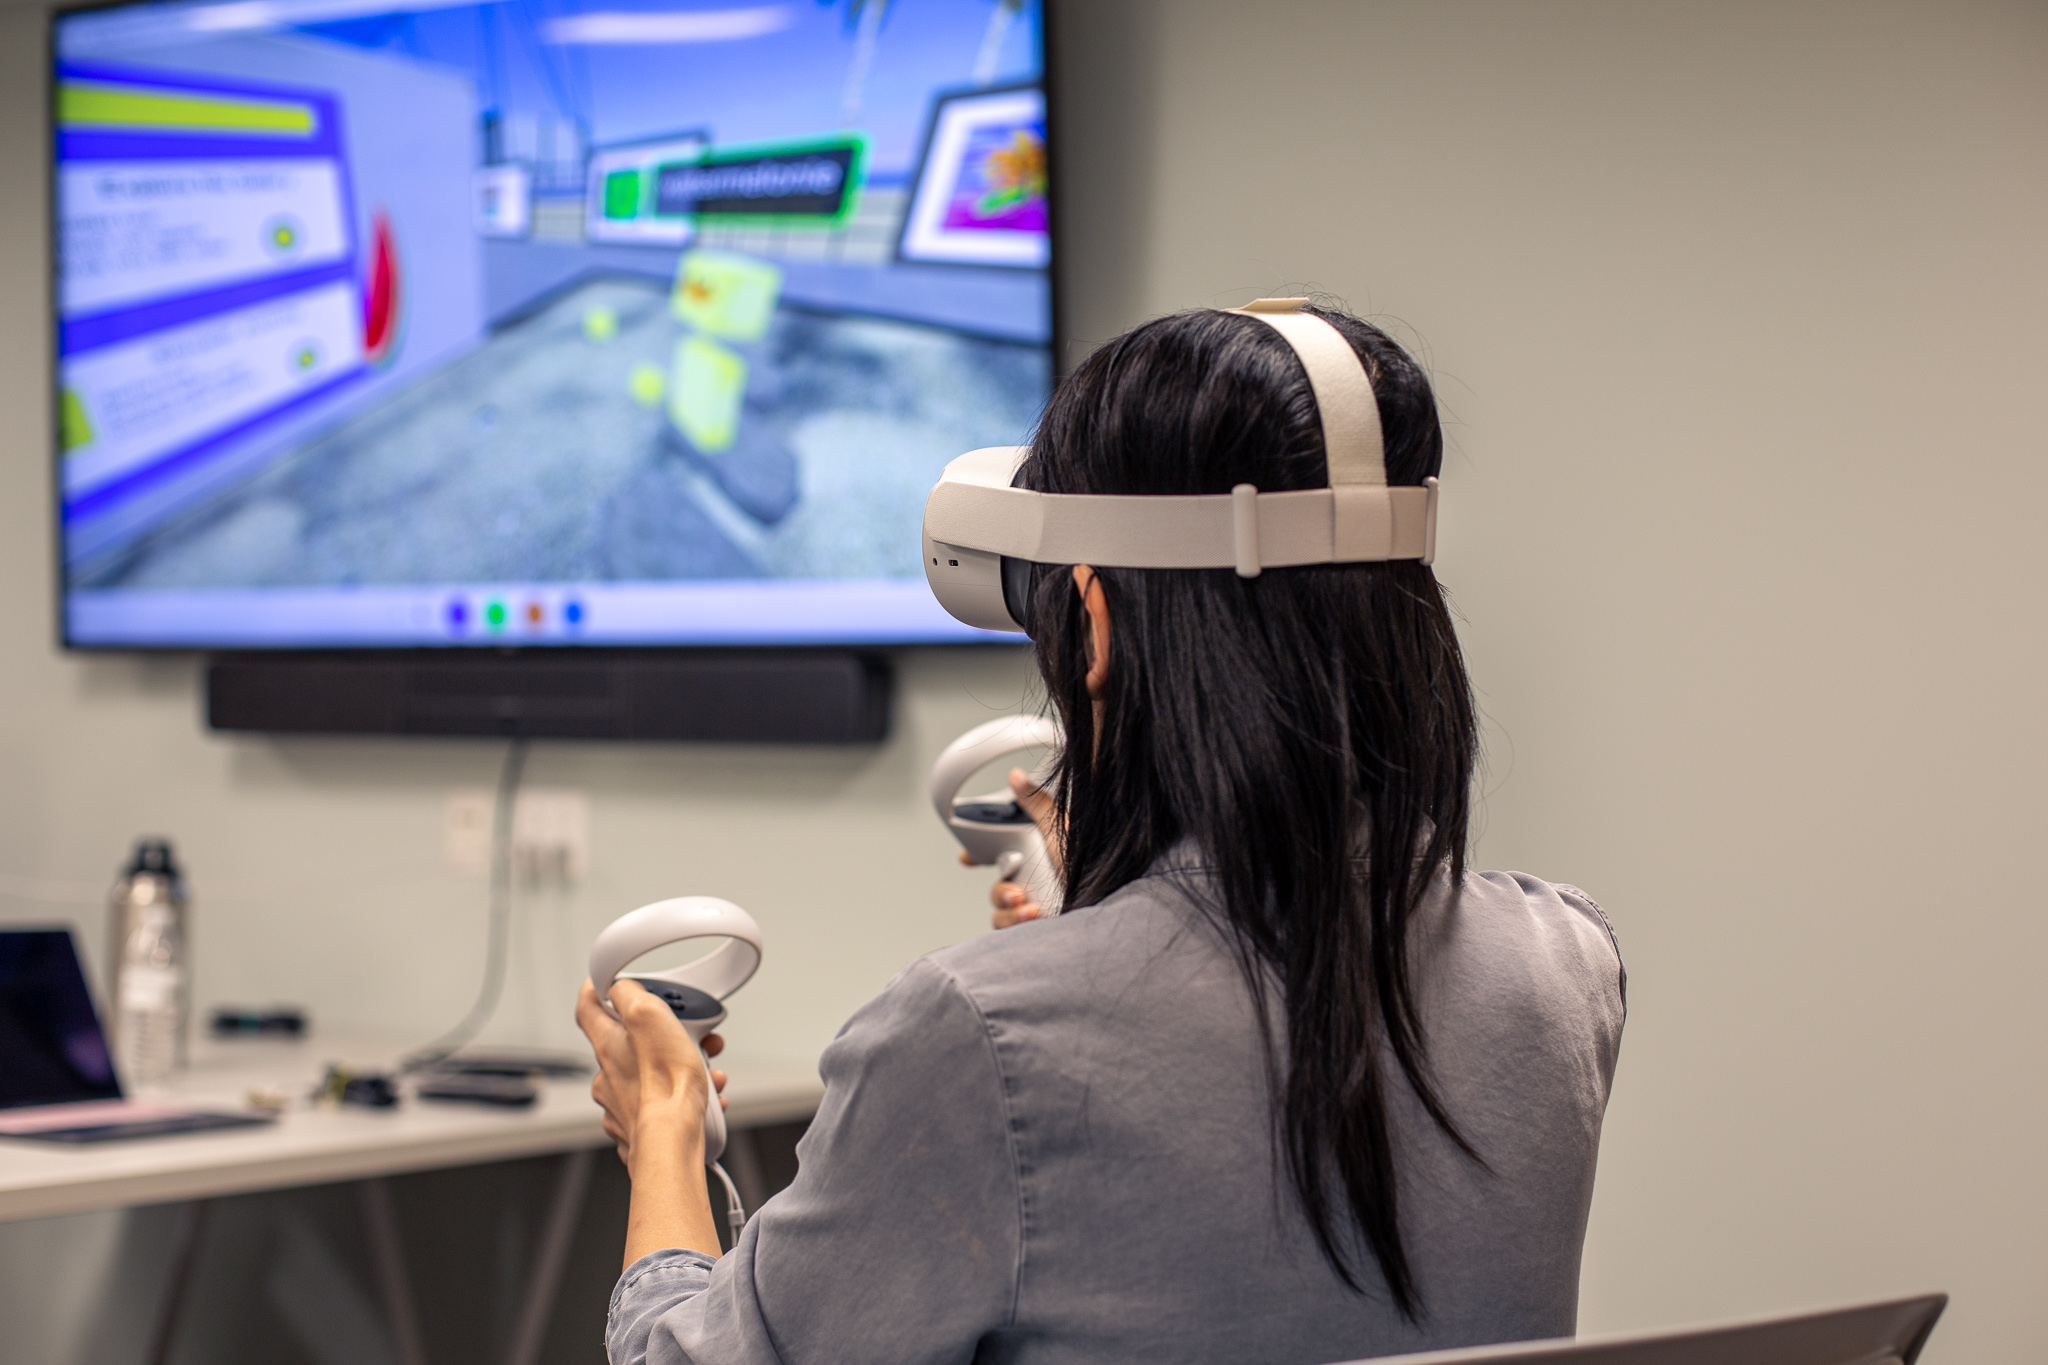 A woman using a VR headset in a classroom.